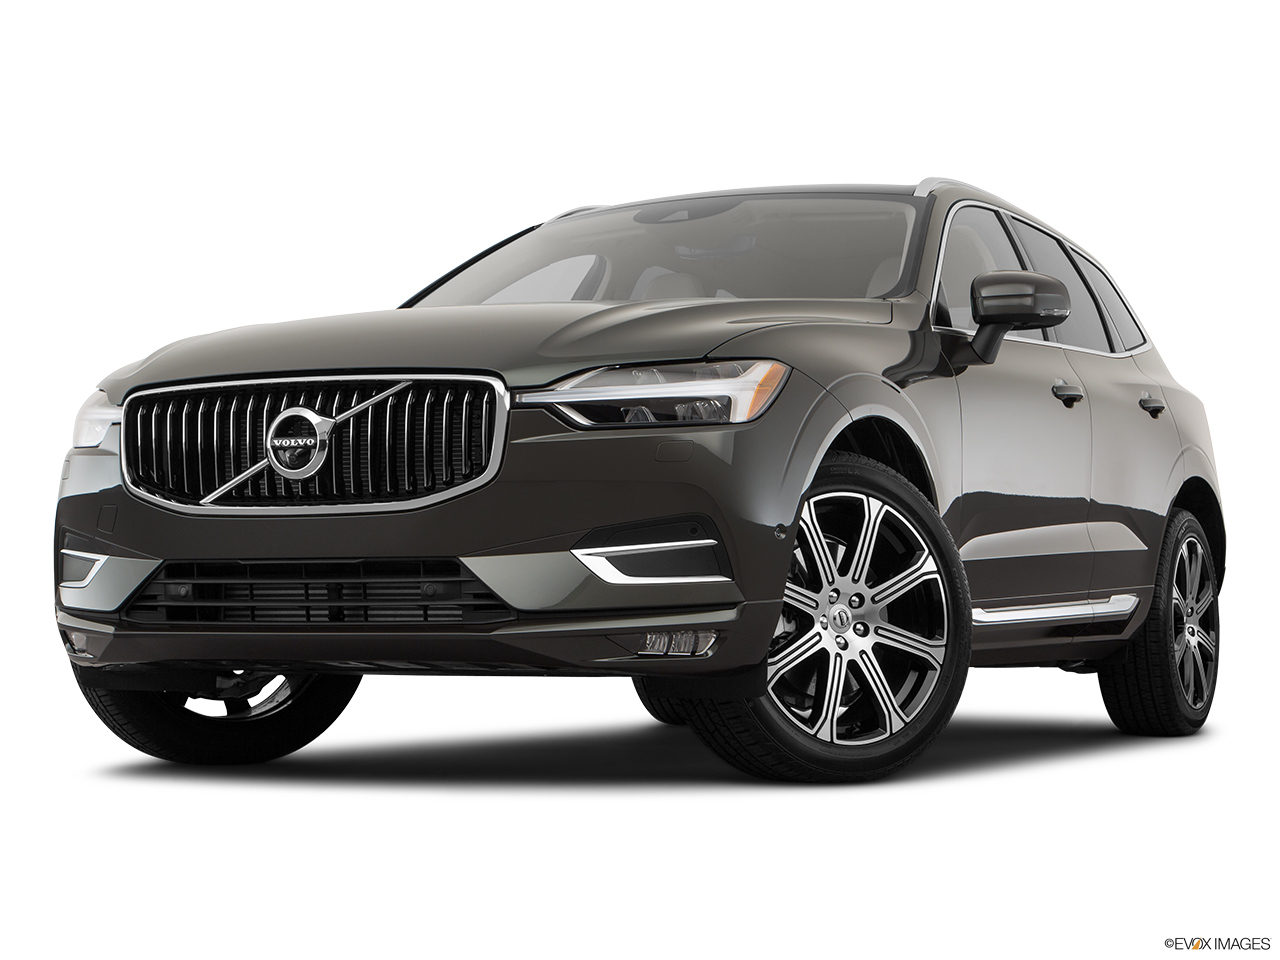 2019 Volvo XC60 T6 Inscription Front angle view, low wide perspective. 